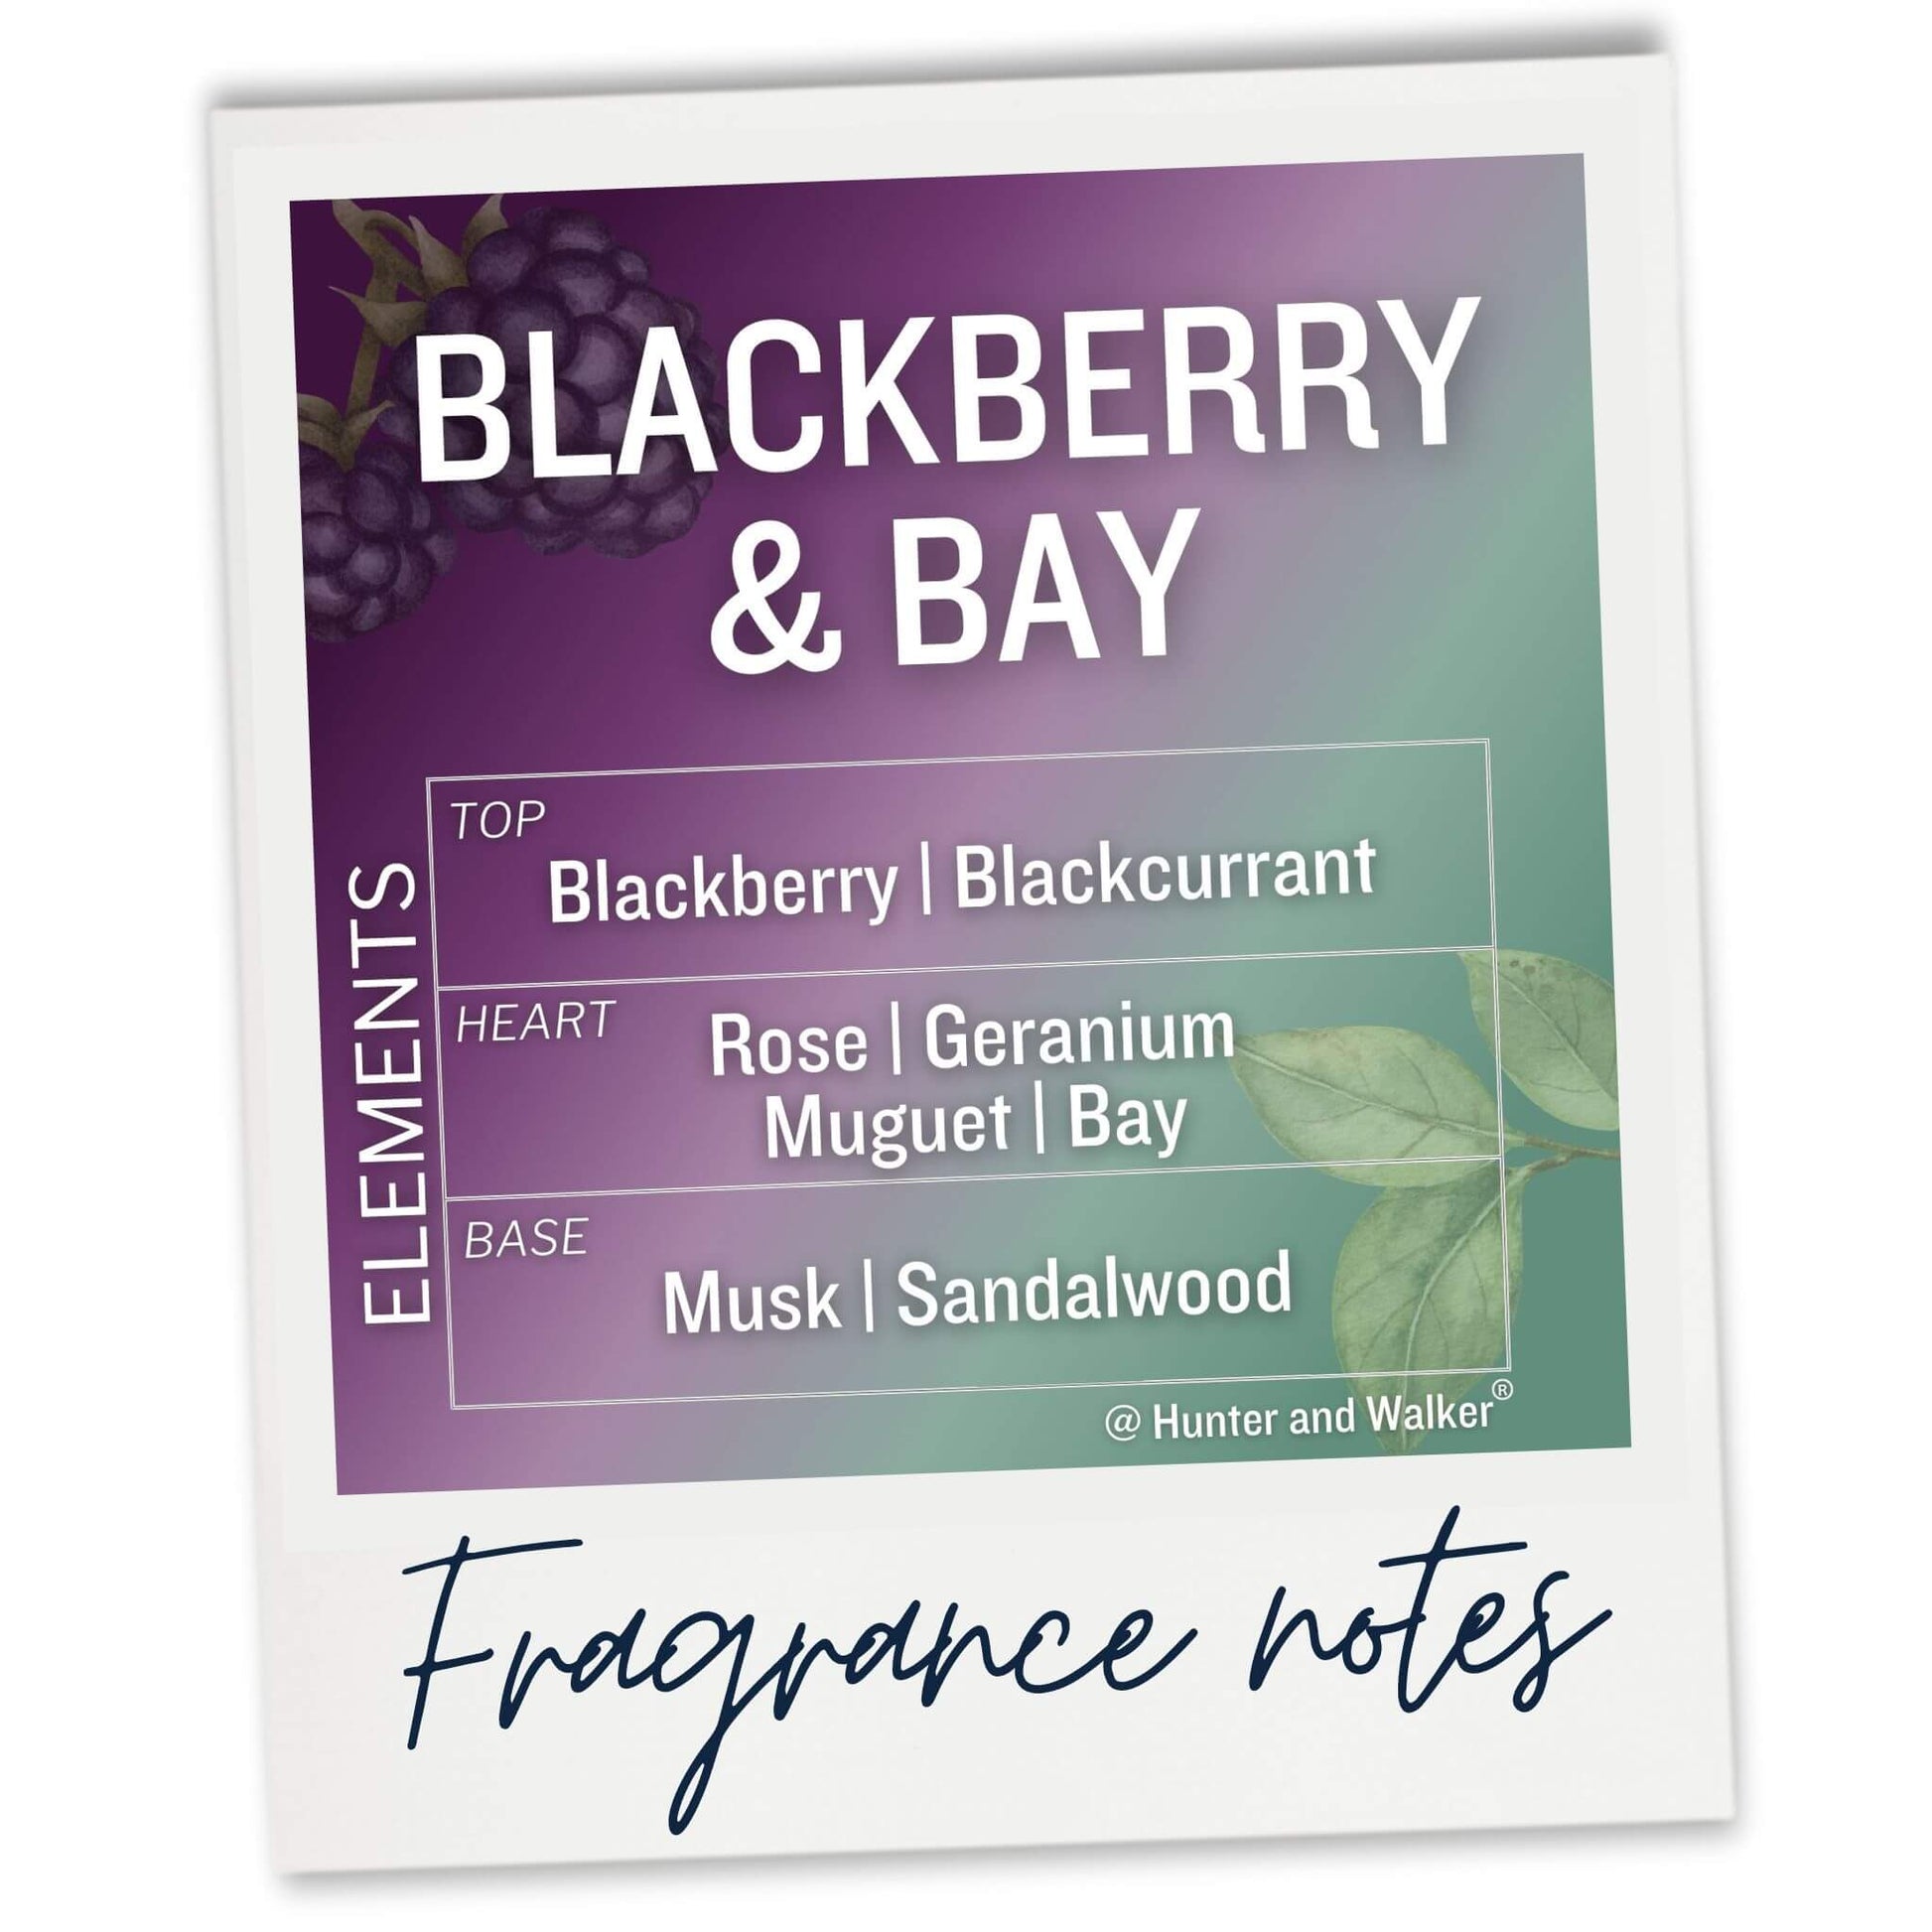 Blackberry and Bay Luxury Wax Melt fragrance notes